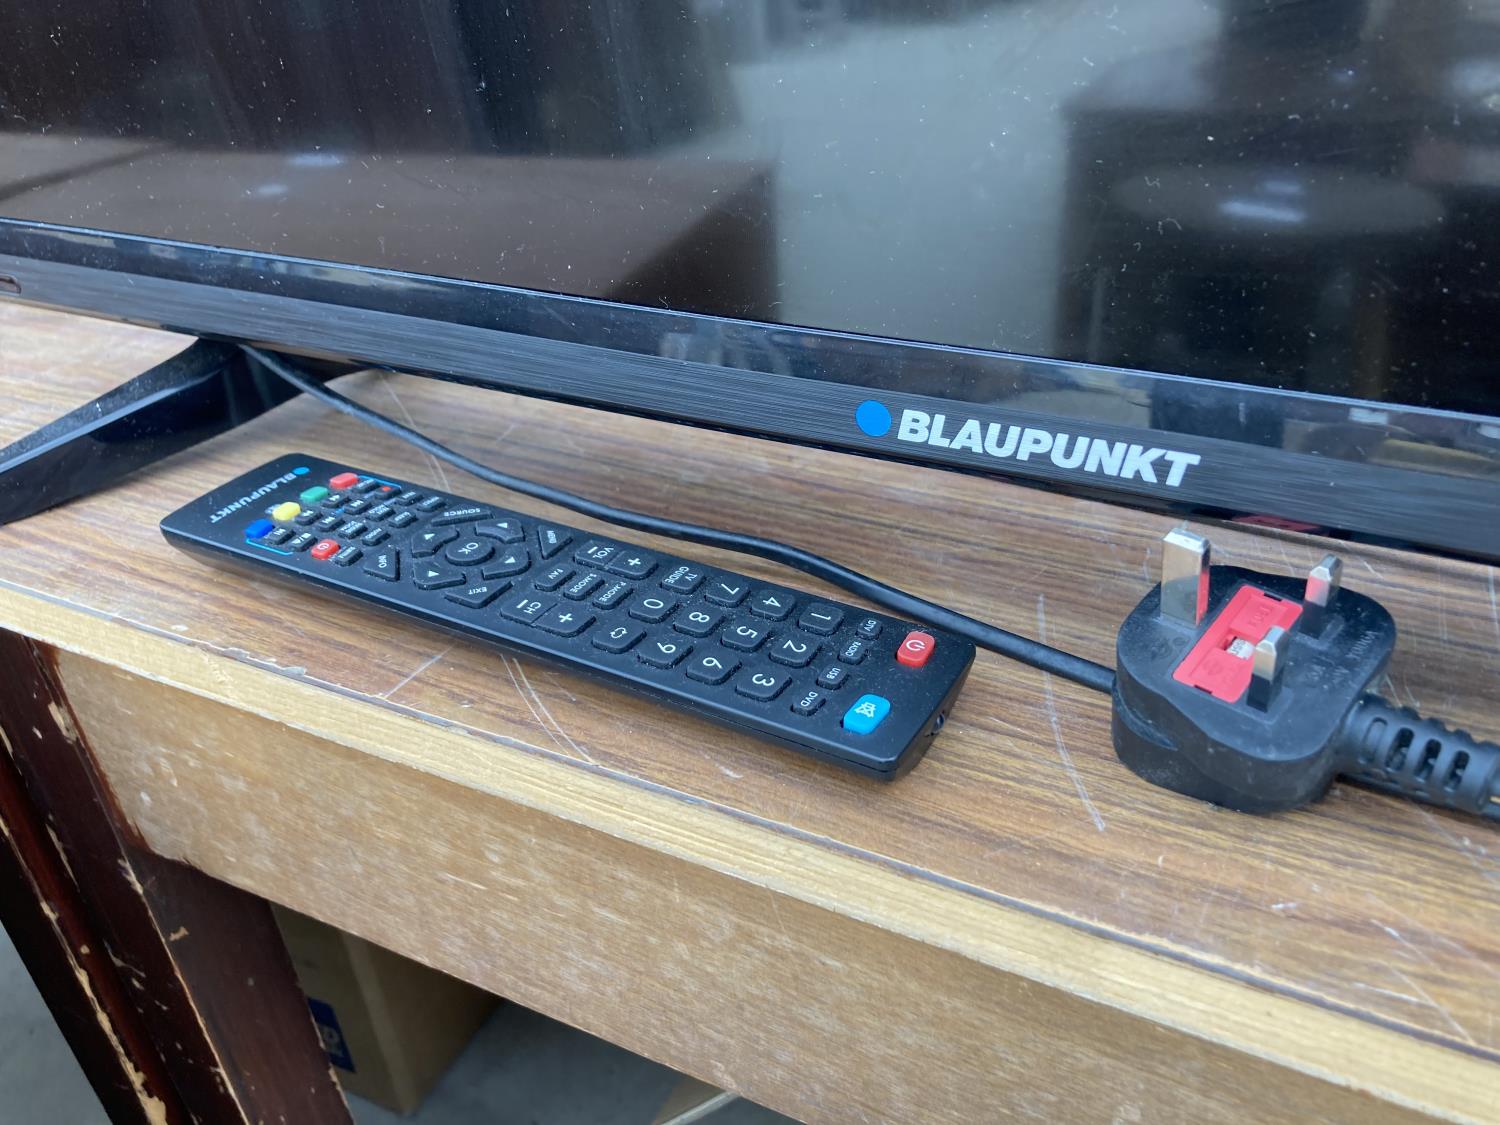 A BLAUPUNKT 32" TELEVISION WITH REMOTE CONTROL - Image 2 of 2